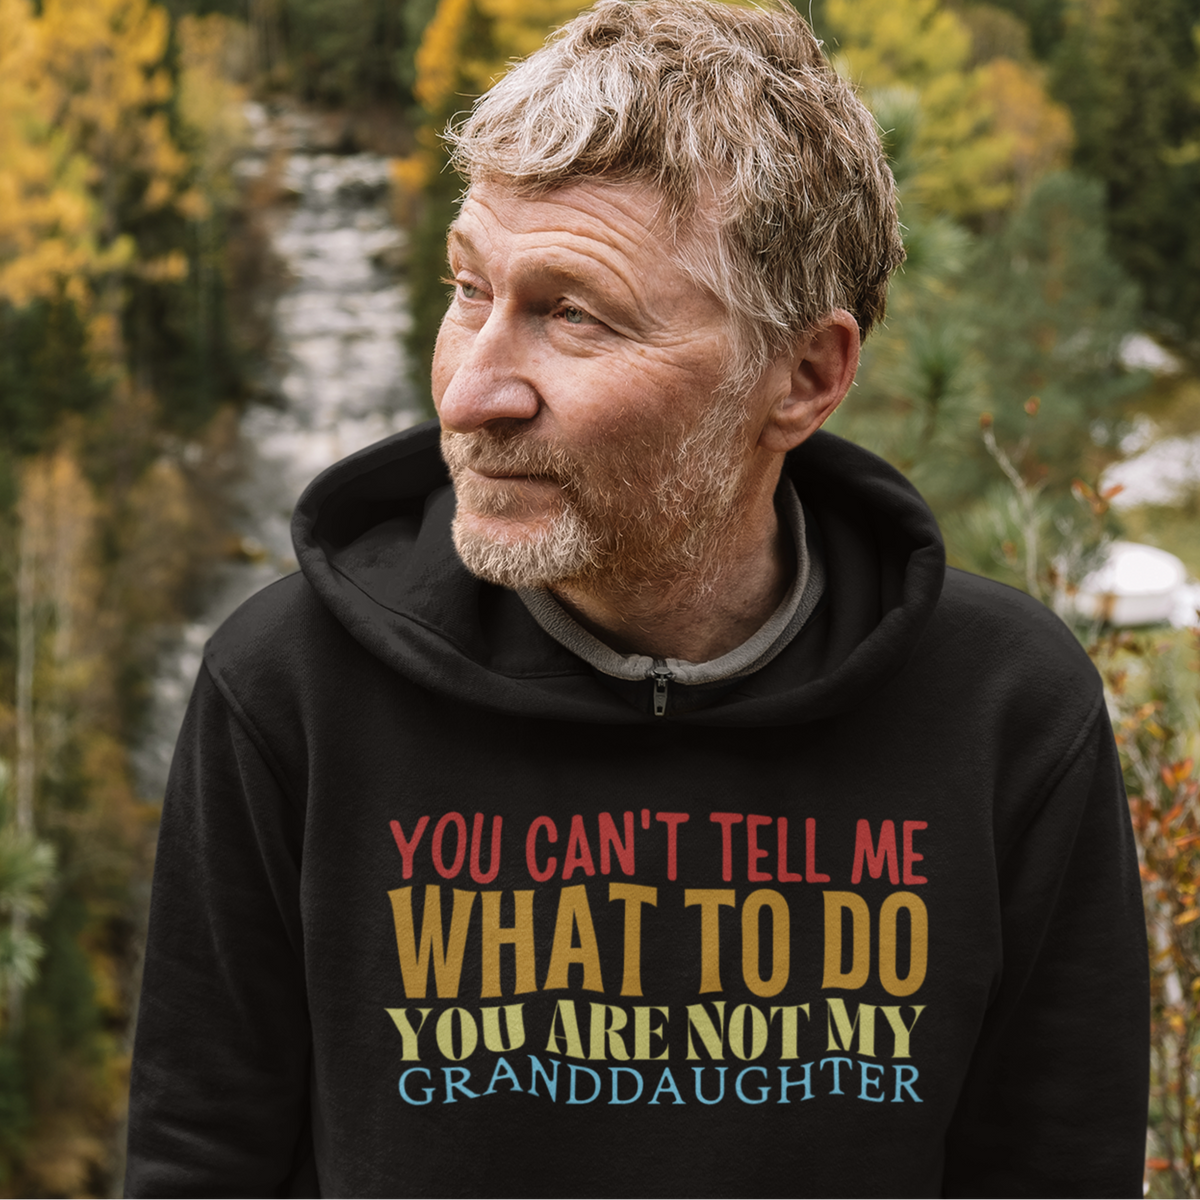 Granddad hoodie, fathers day shirt, funny mens shirt, hoodie, gift for him, gift for her, funny grandma tee, funny granddad tee, new papa shirt, father hoodie, you can't tell me what to do you are not my granddaughter, new granddaddy shirt, granddad gift